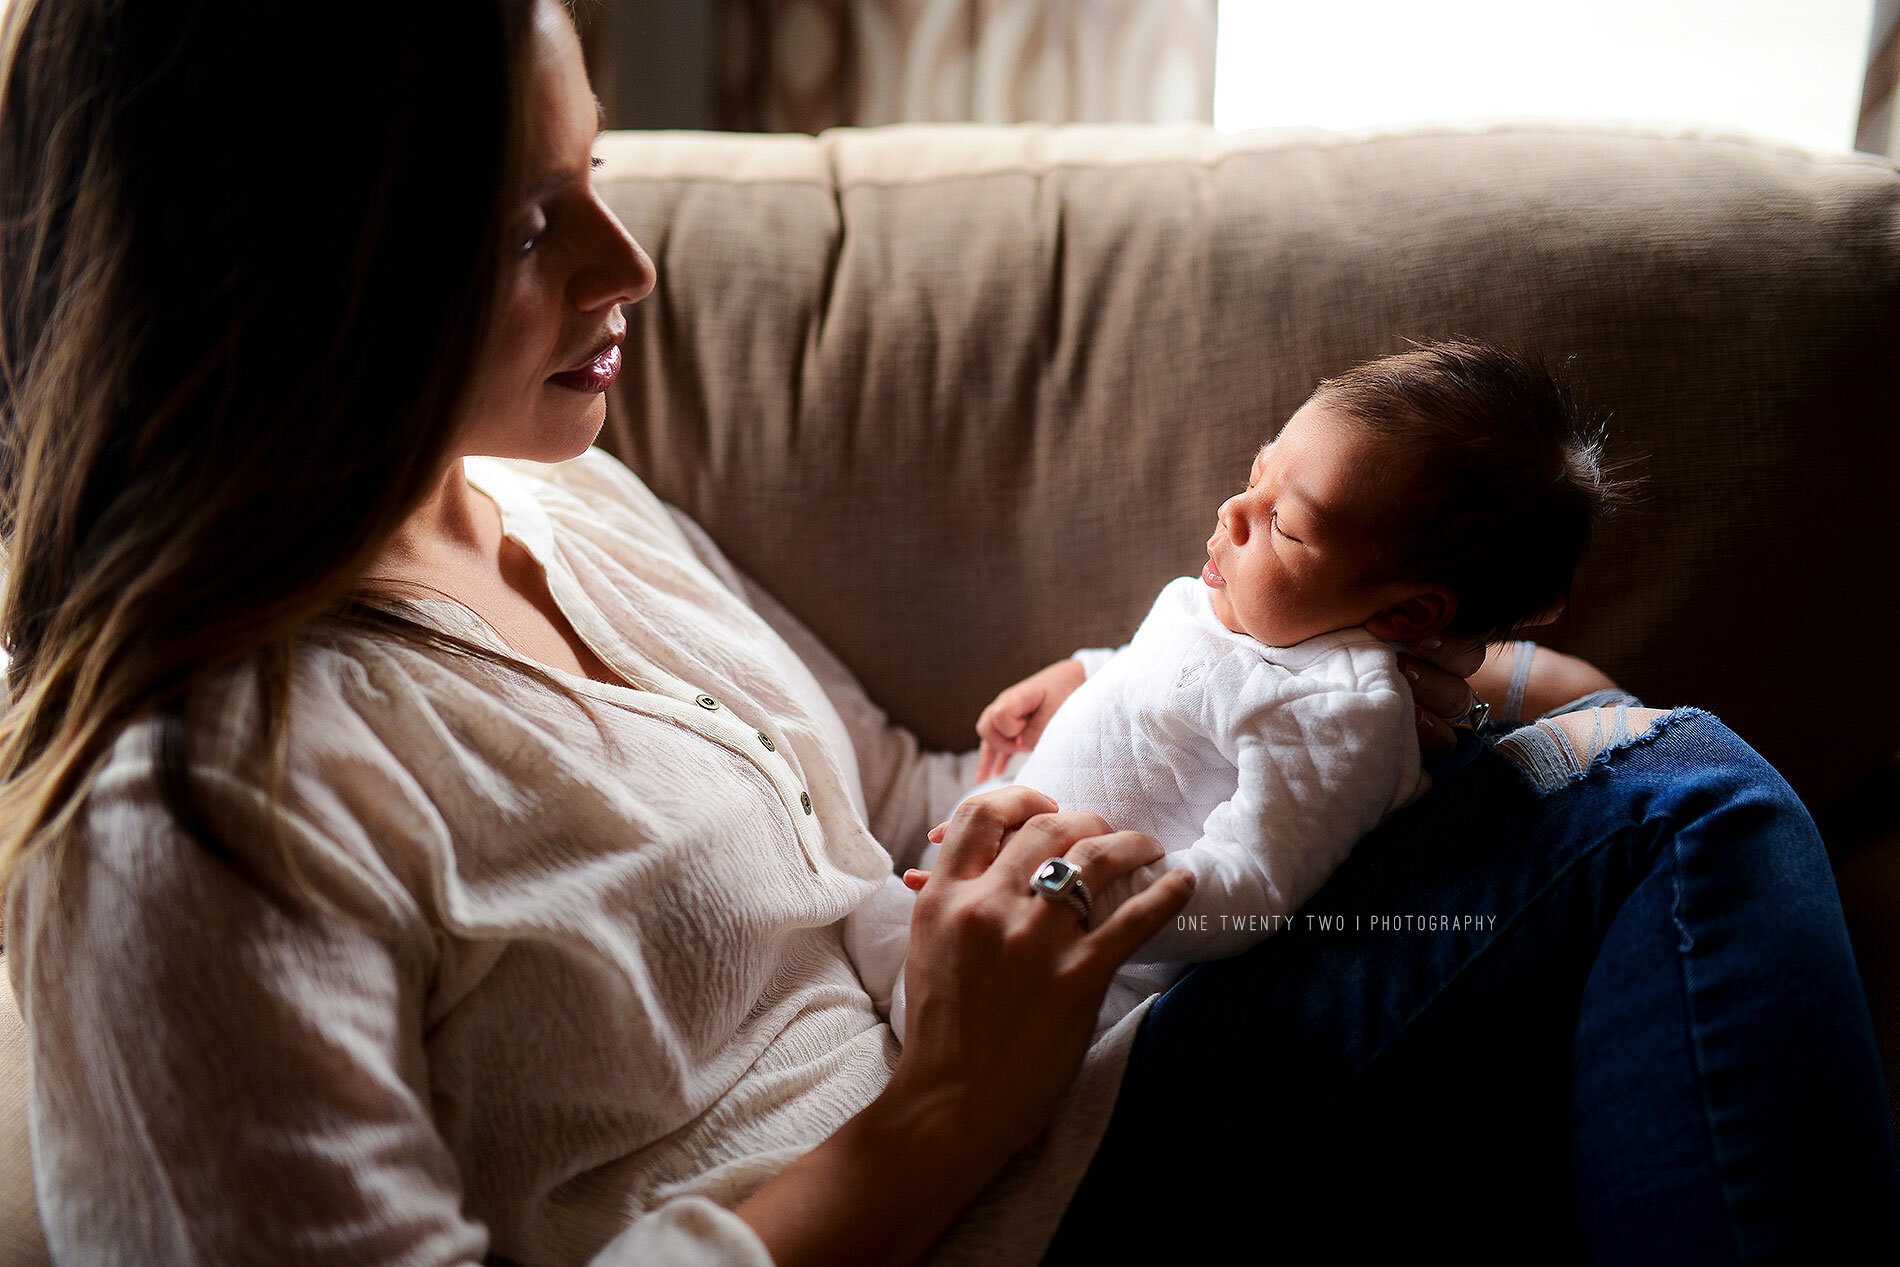 mom-and-newborn-in-home-photography-tips-one-twenty-two-photography.jpg